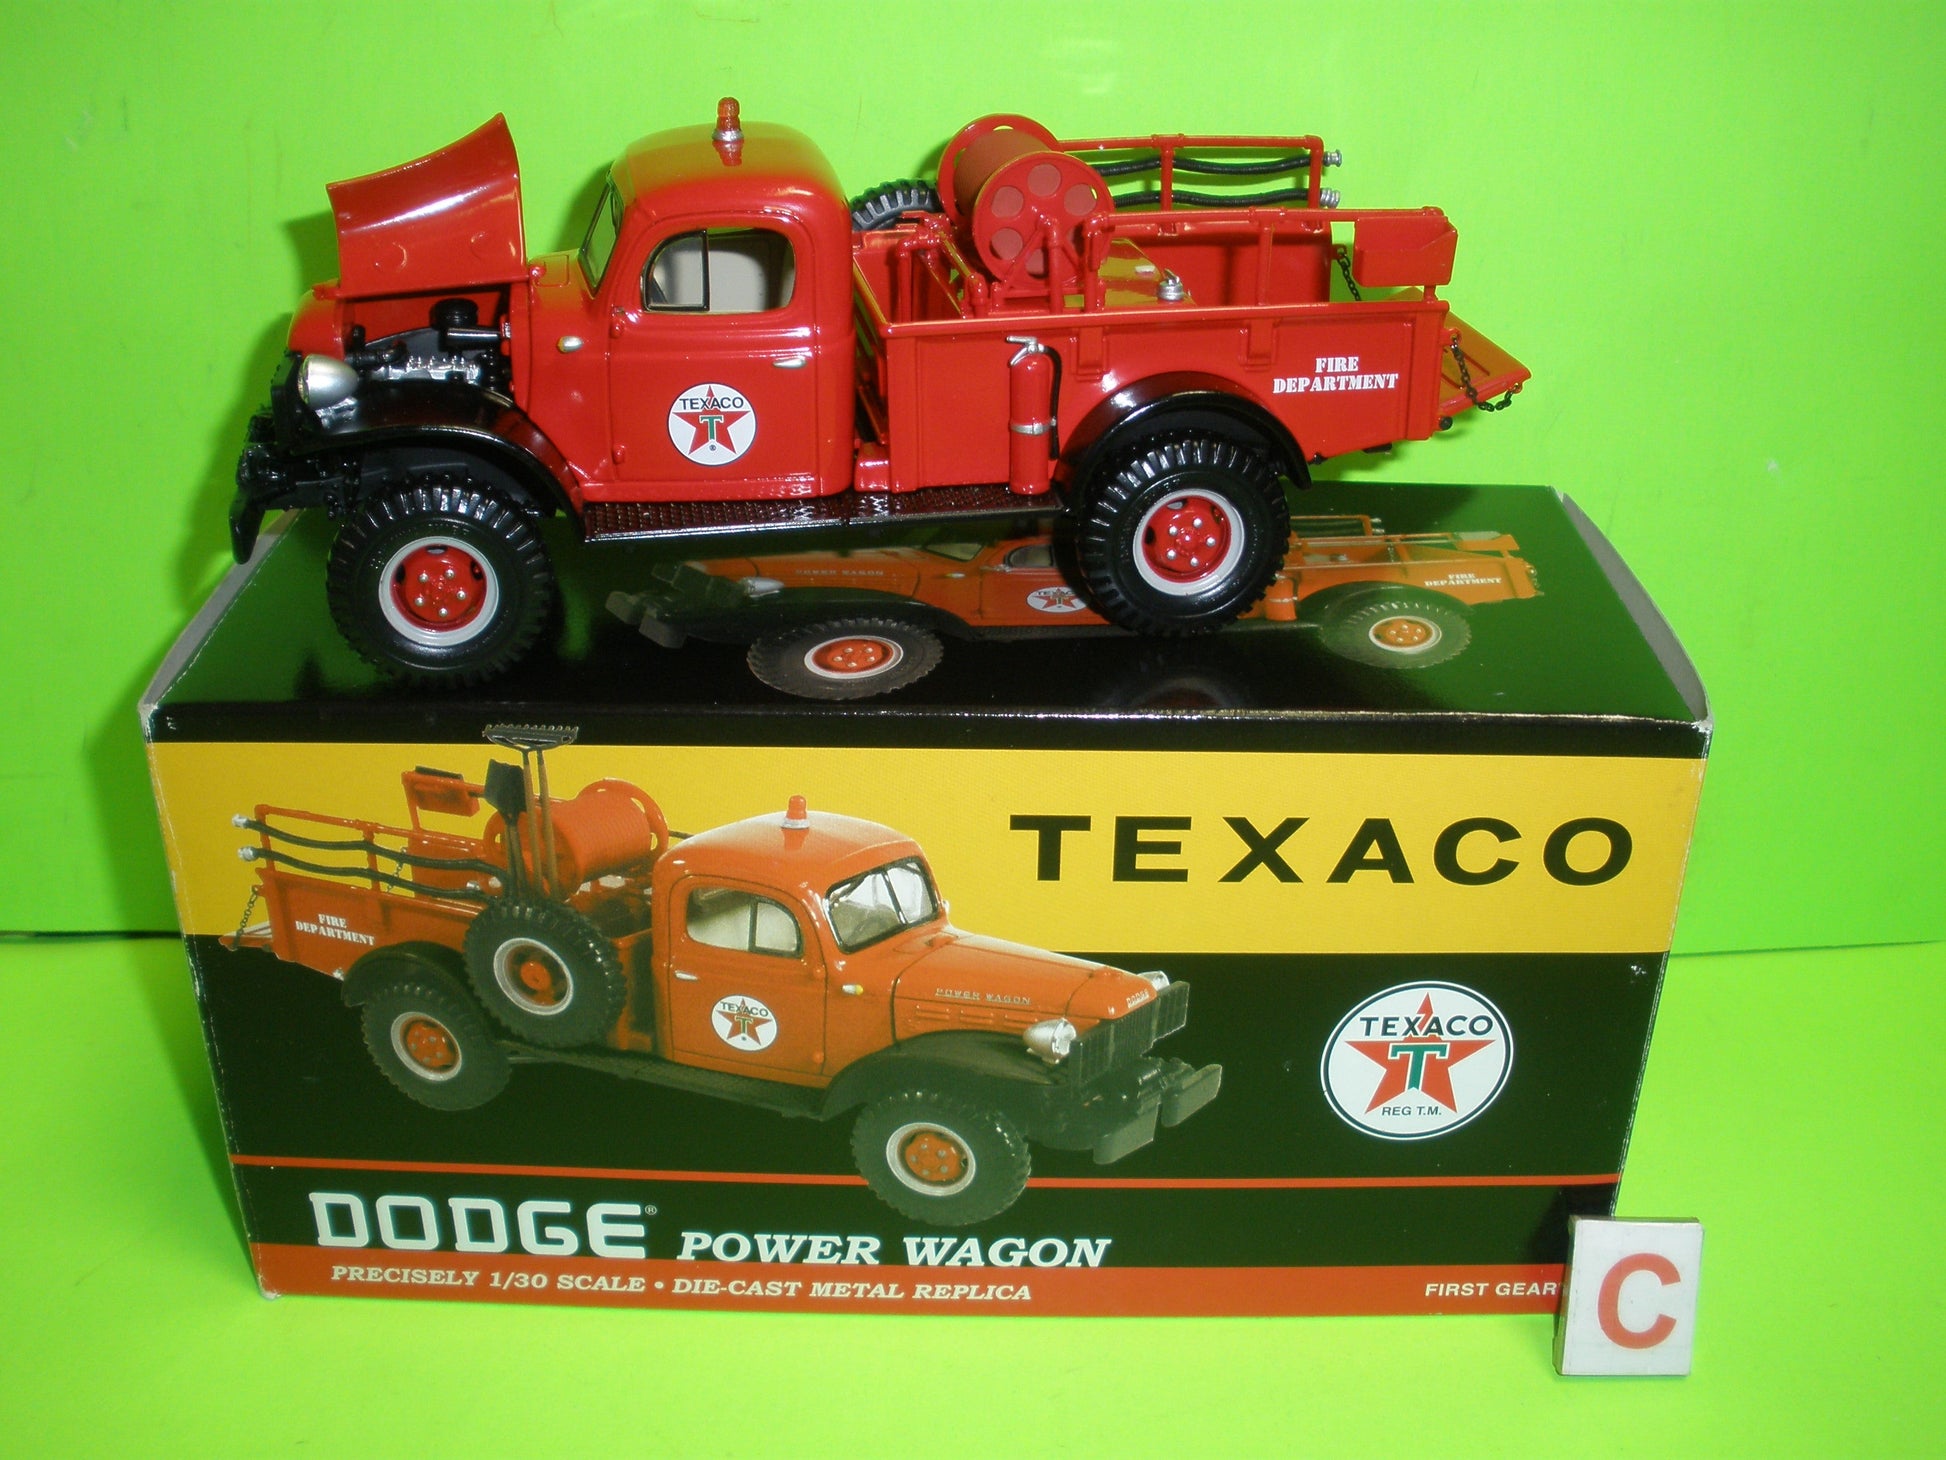 Texaco Forestry Division 1946 Dodge Power Wagon Pickup Truck